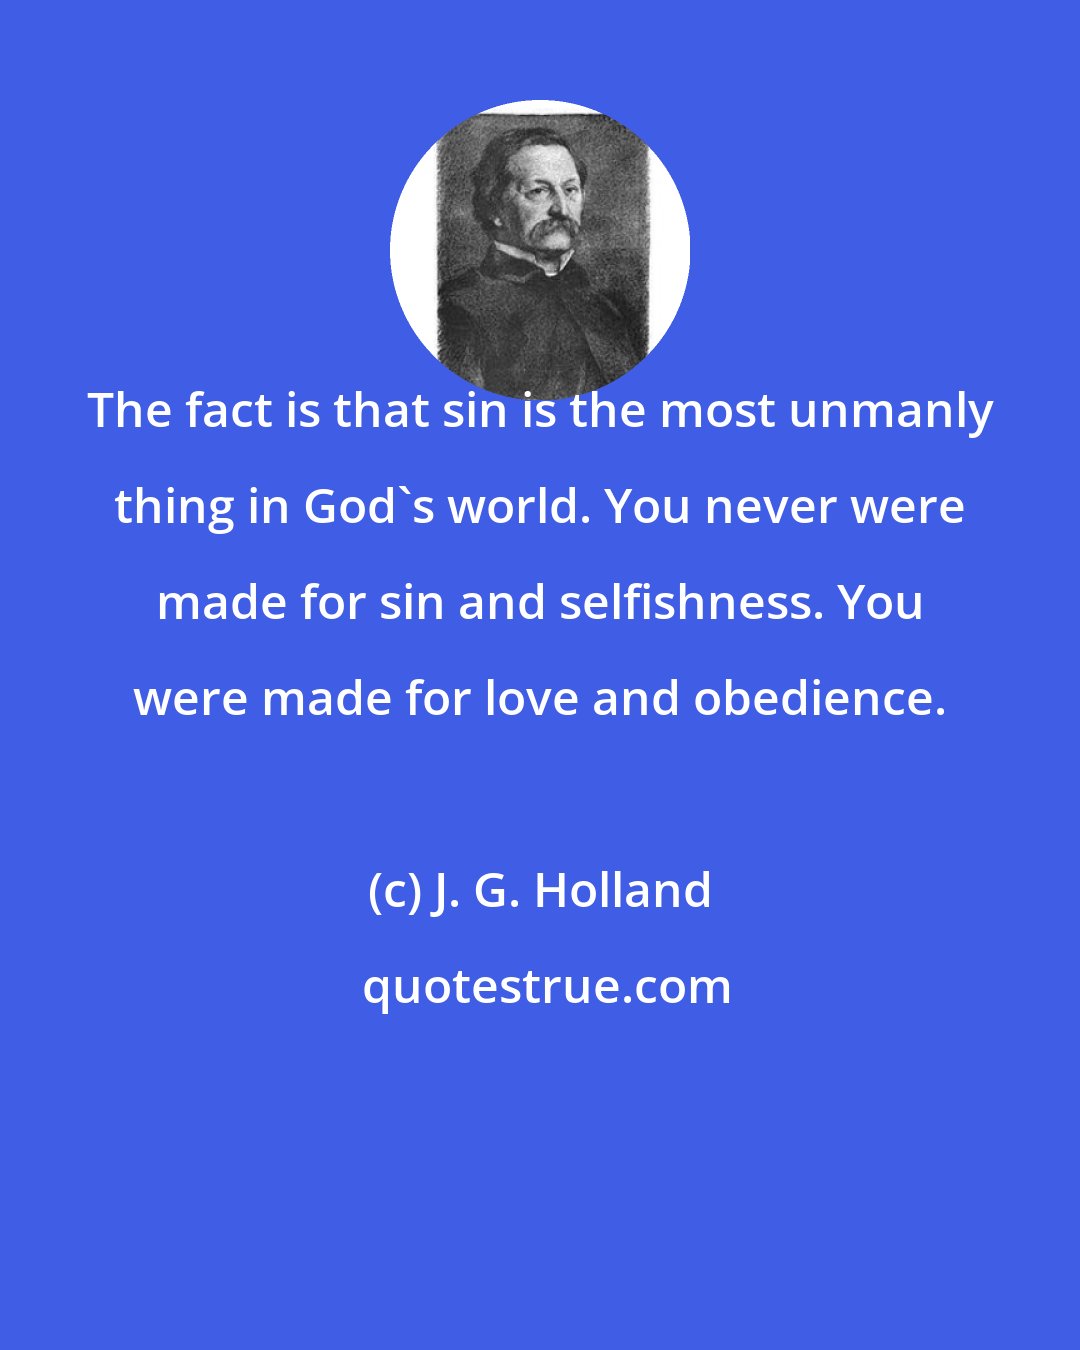 J. G. Holland: The fact is that sin is the most unmanly thing in God's world. You never were made for sin and selfishness. You were made for love and obedience.